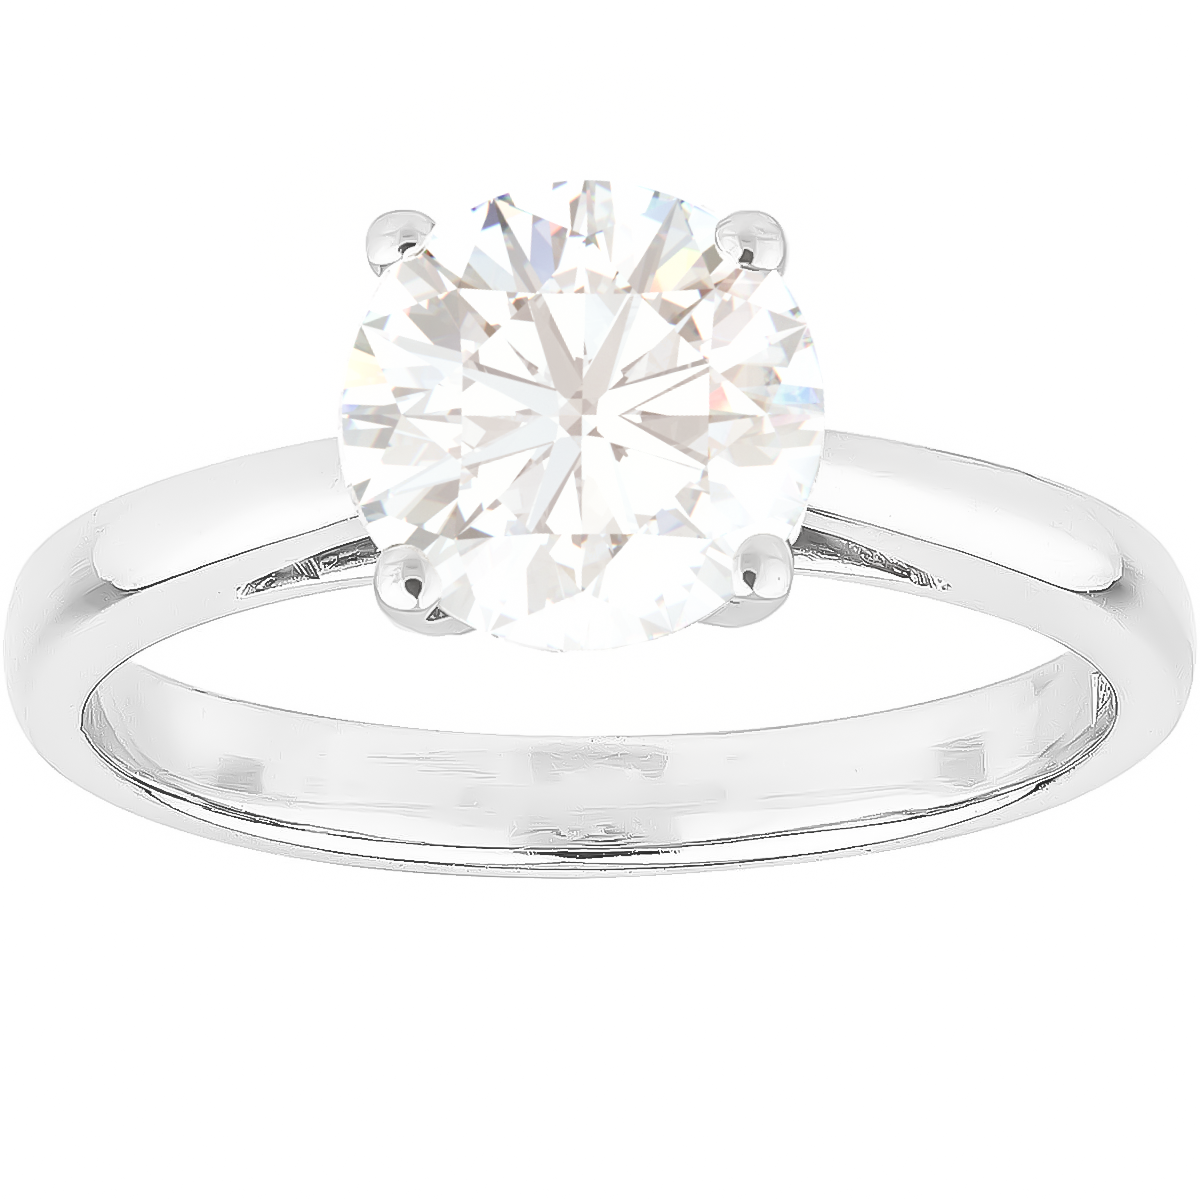 Sunsonite 1.00ct Near Clear Diamond Solitaire Ring set in four claws setting of 18ct White Gold certified by DISA. Perfect for Wedding and Engagements.